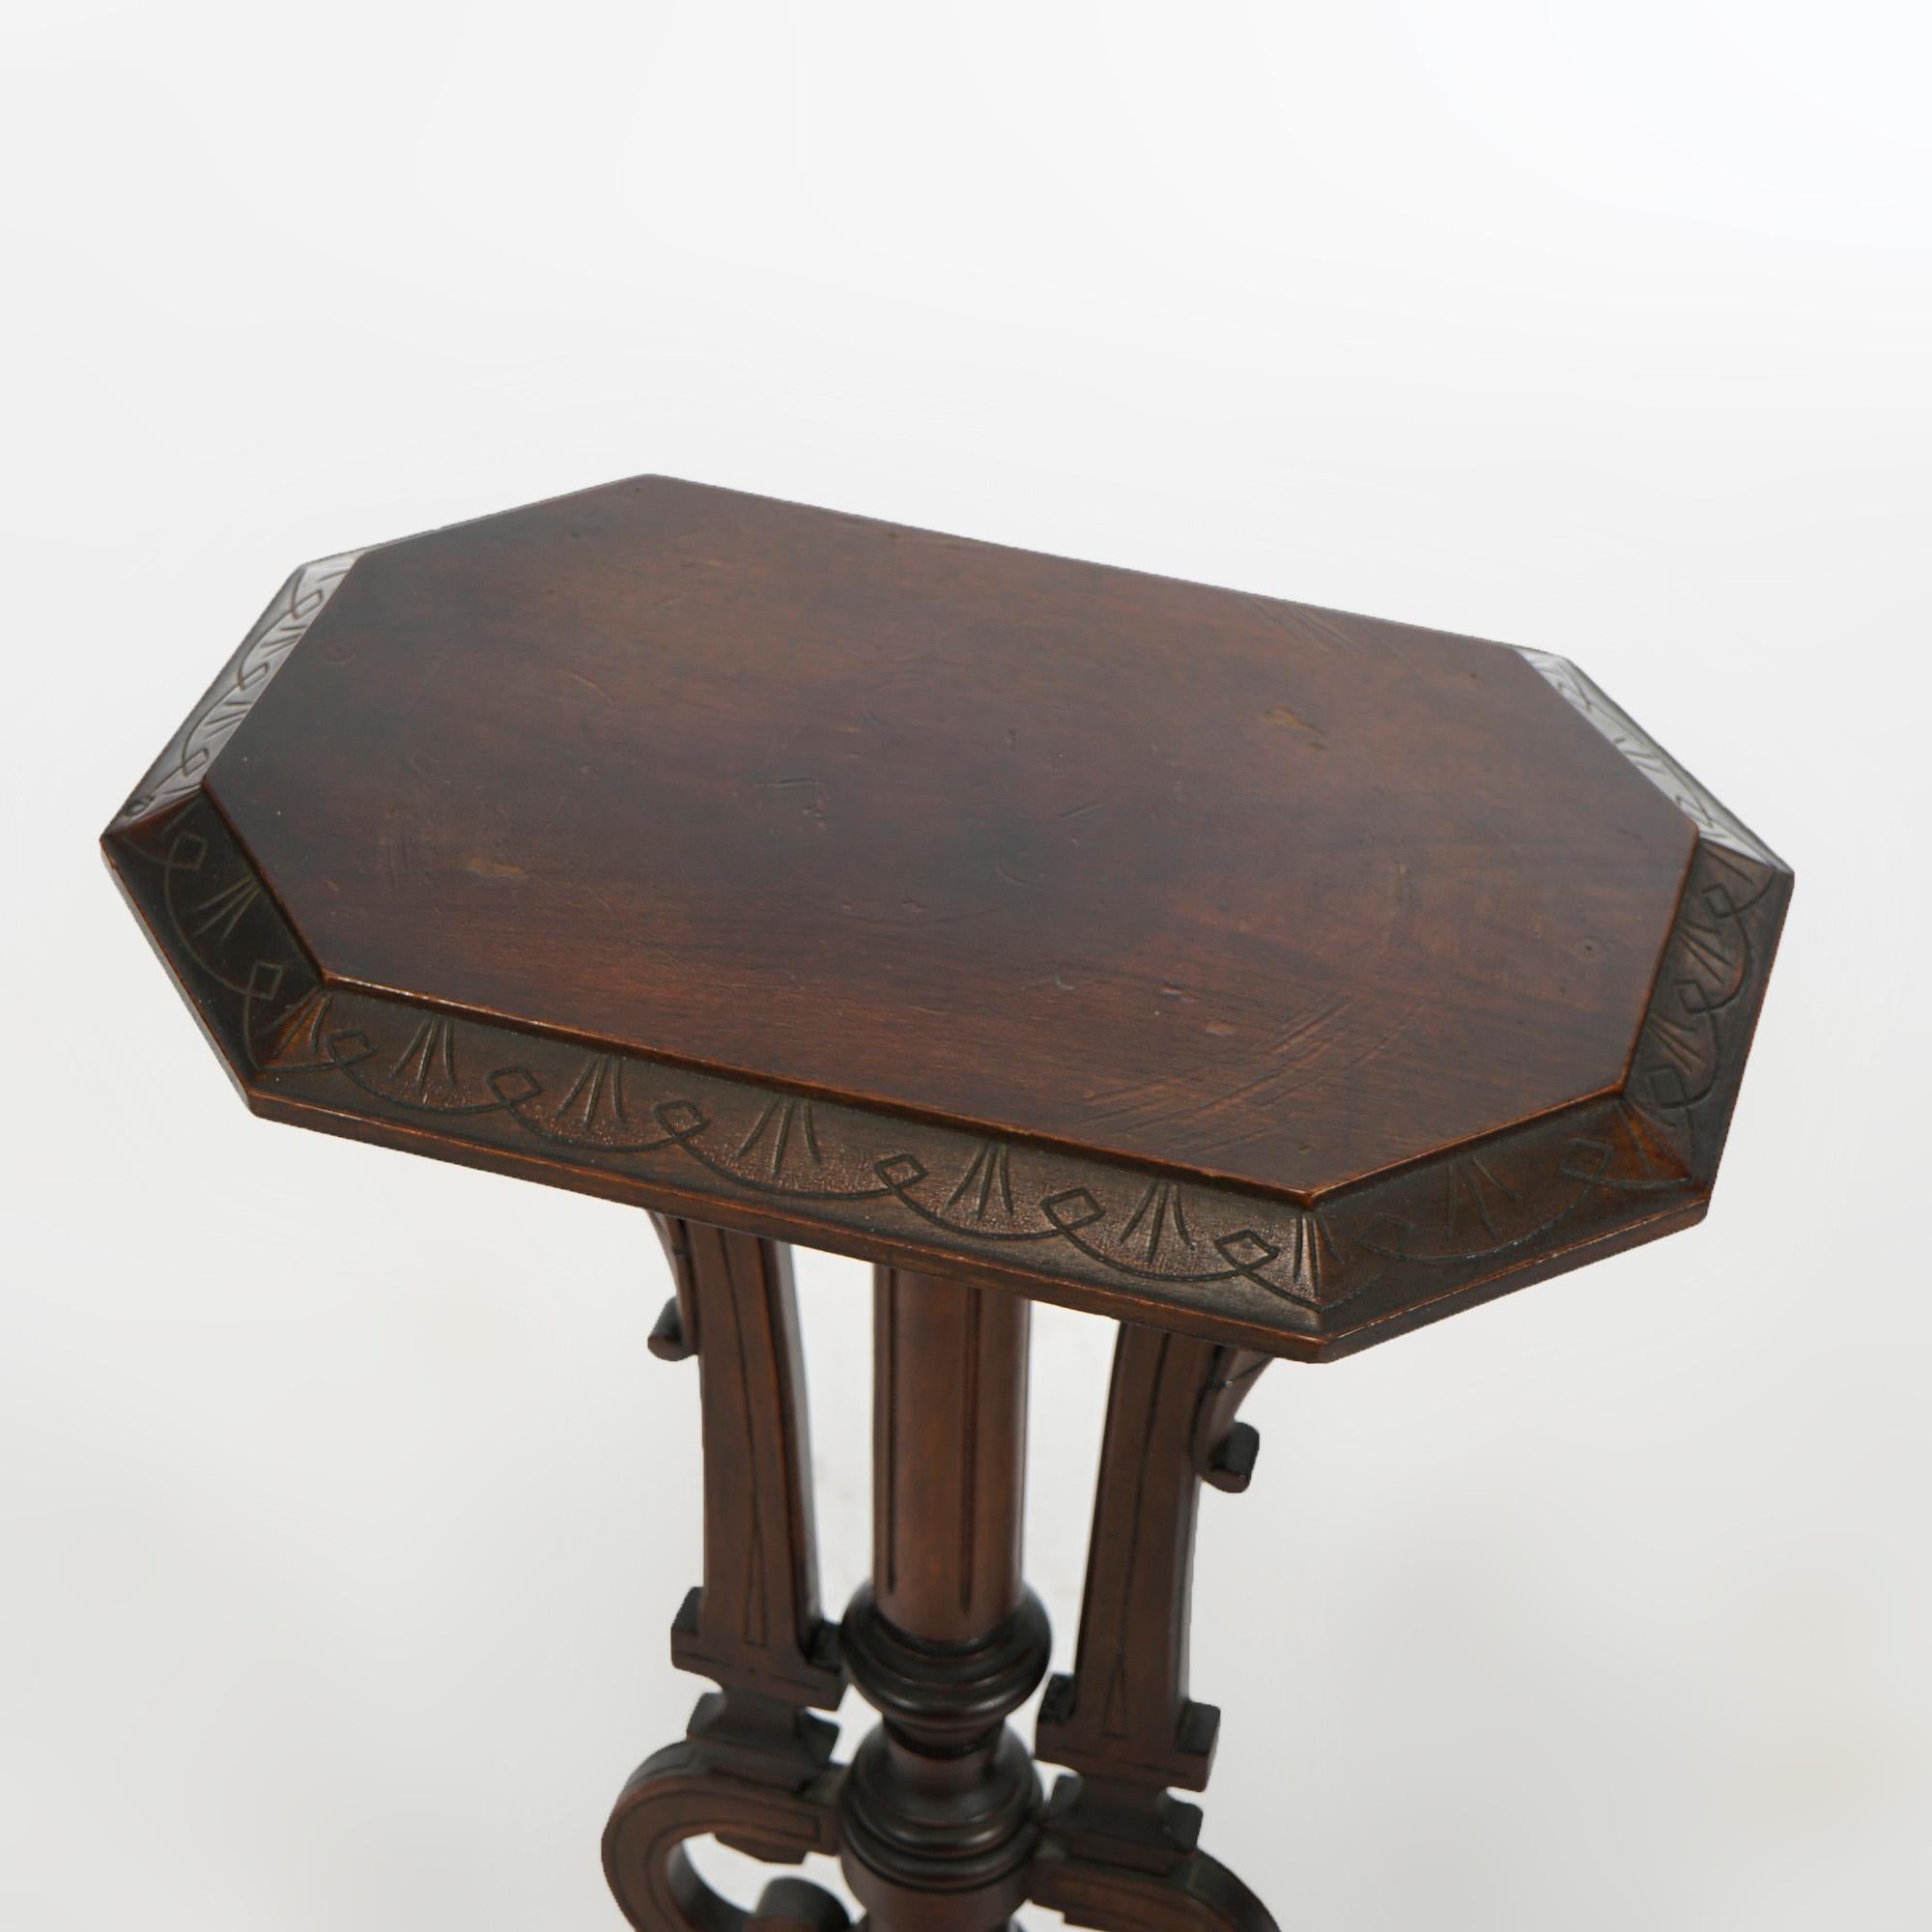 Antique Aesthetic Movement Carved Walnut Sculpture Display Pedestal Circa 1890 For Sale 5